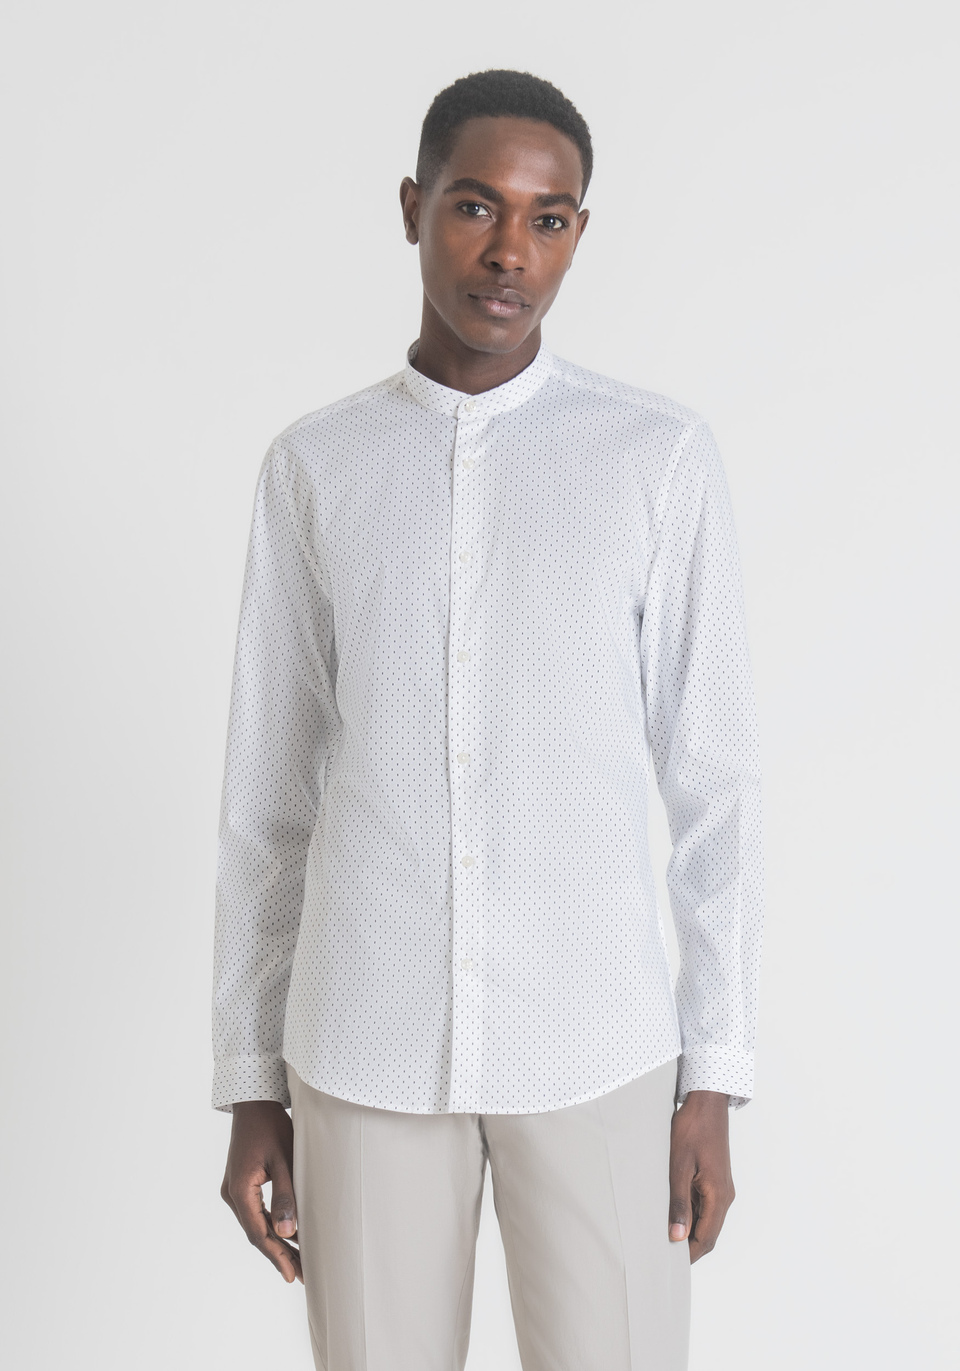 SLIM-FIT SHIRT IN SOFT-TOUCH PURE COTTON WITH KOREAN COLLAR AND POLKA DOT MICRO PATTERN - Antony Morato Online Shop